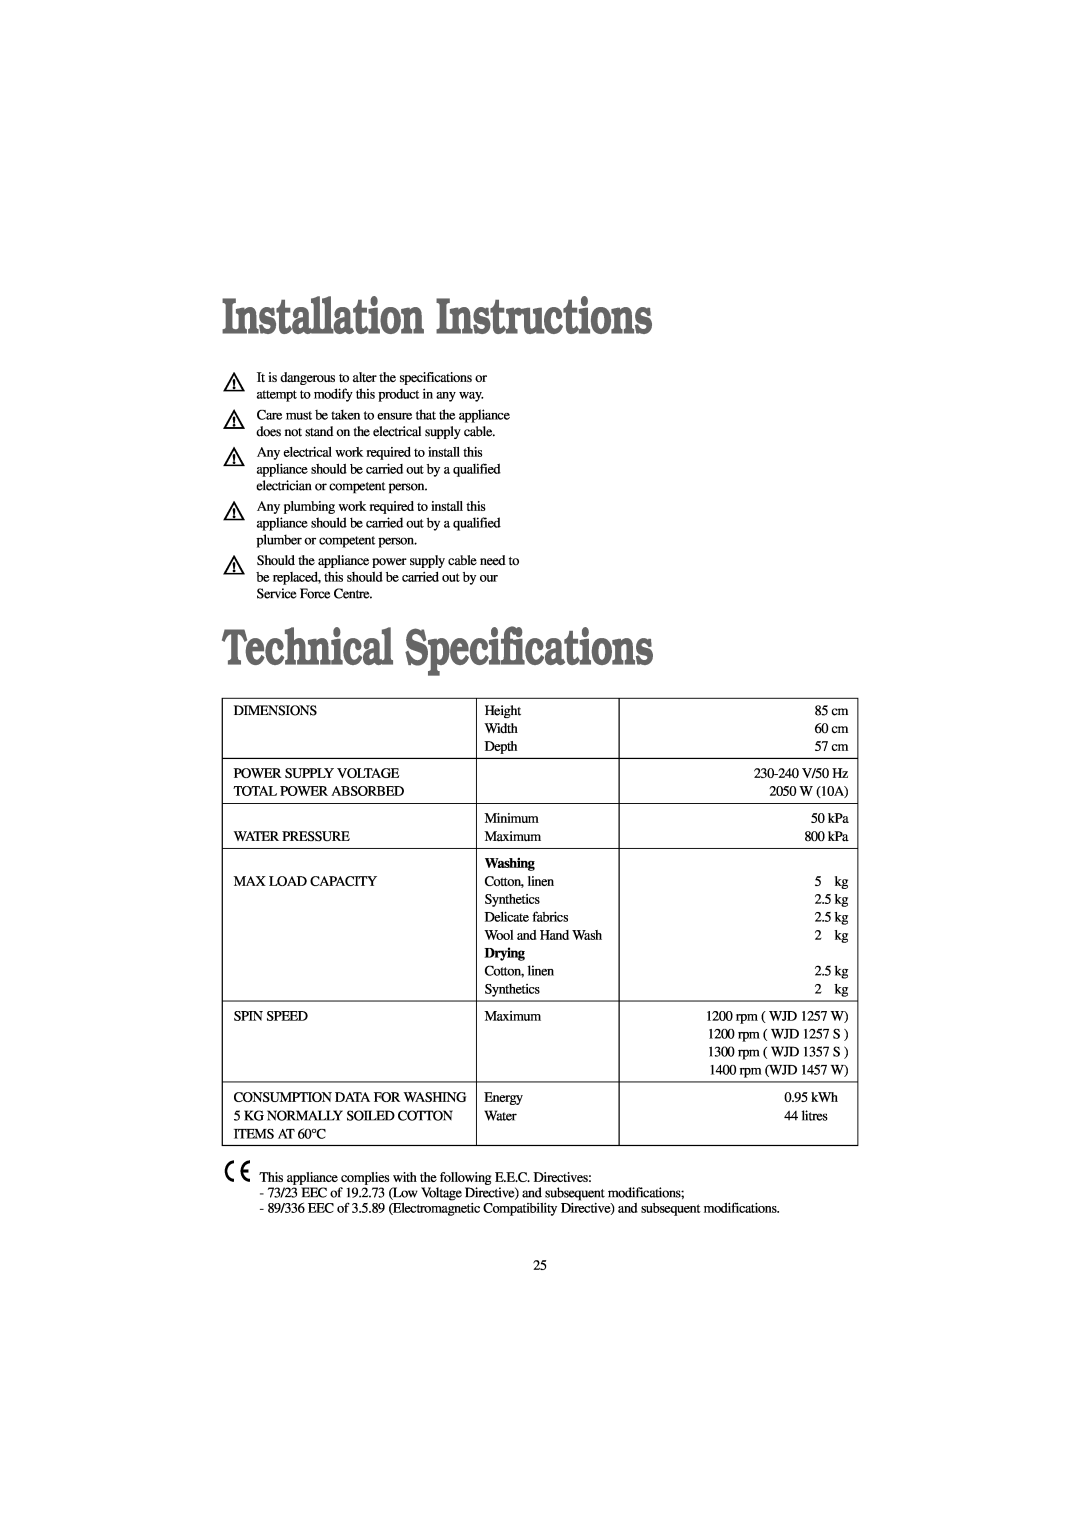 Zanussi WJD 1357 S manual Installation Instructions, Technical Specifications, Drying, Consumption Data For Washing 